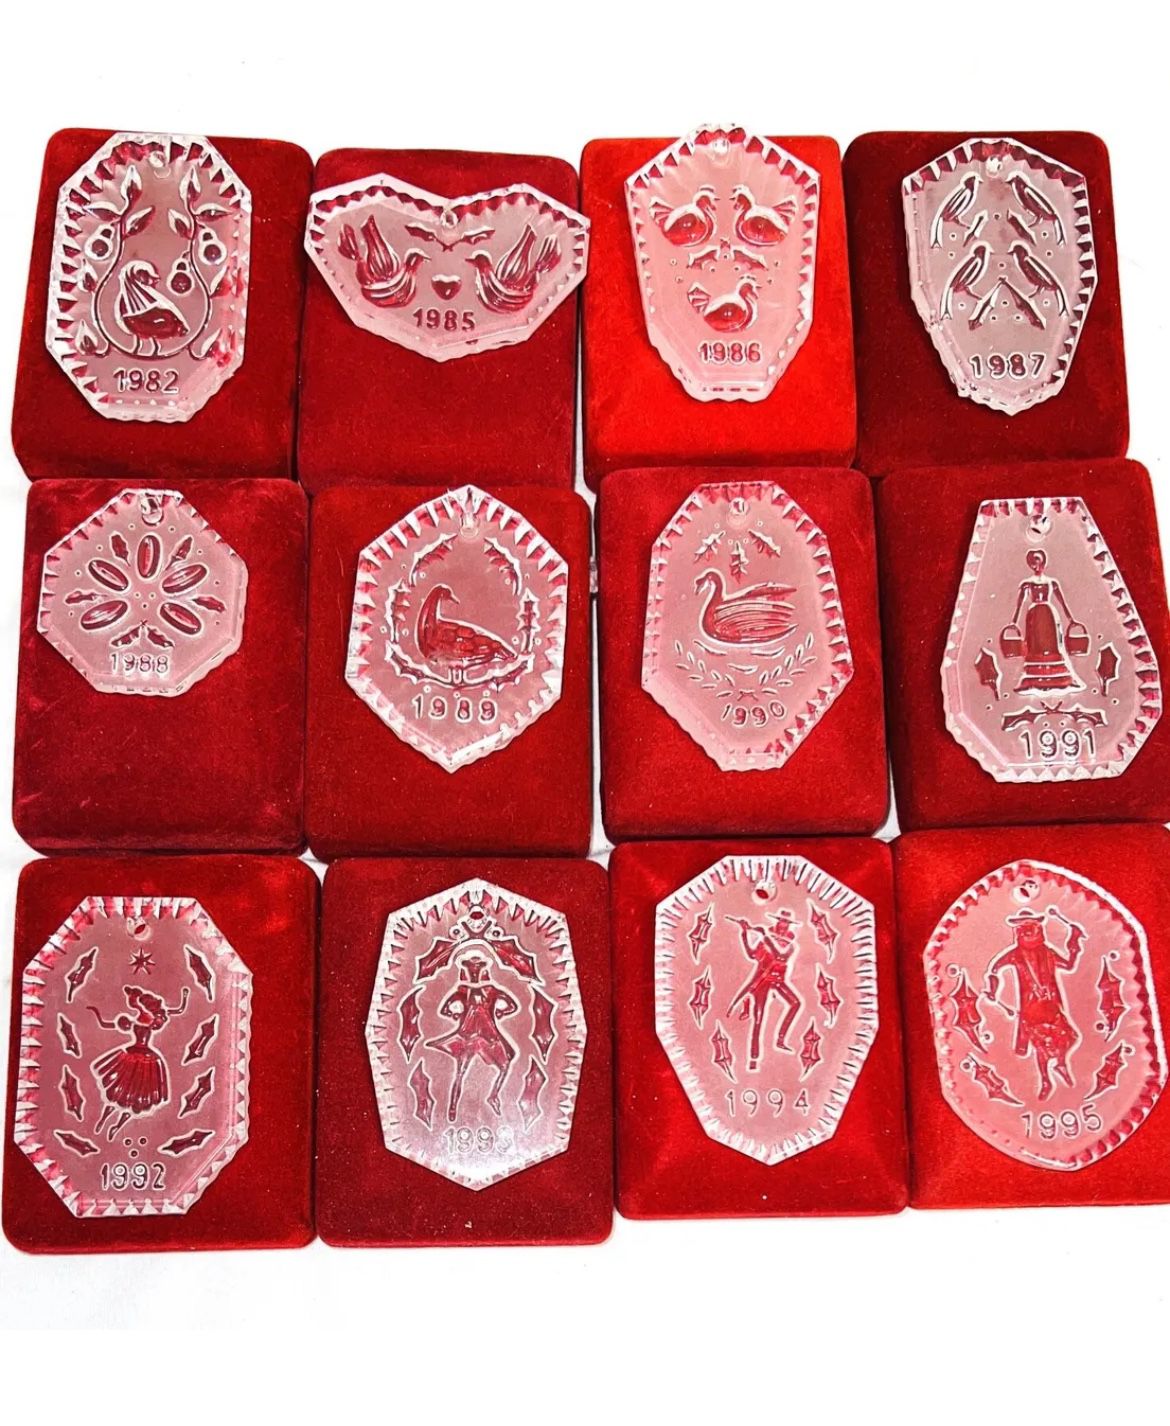 WATERFORD CRYSTAL  [1st Edition] TWELVE DAYS CHRISTMAS ORNAMENTS *COMPLETE SET OF 12* In Boxes